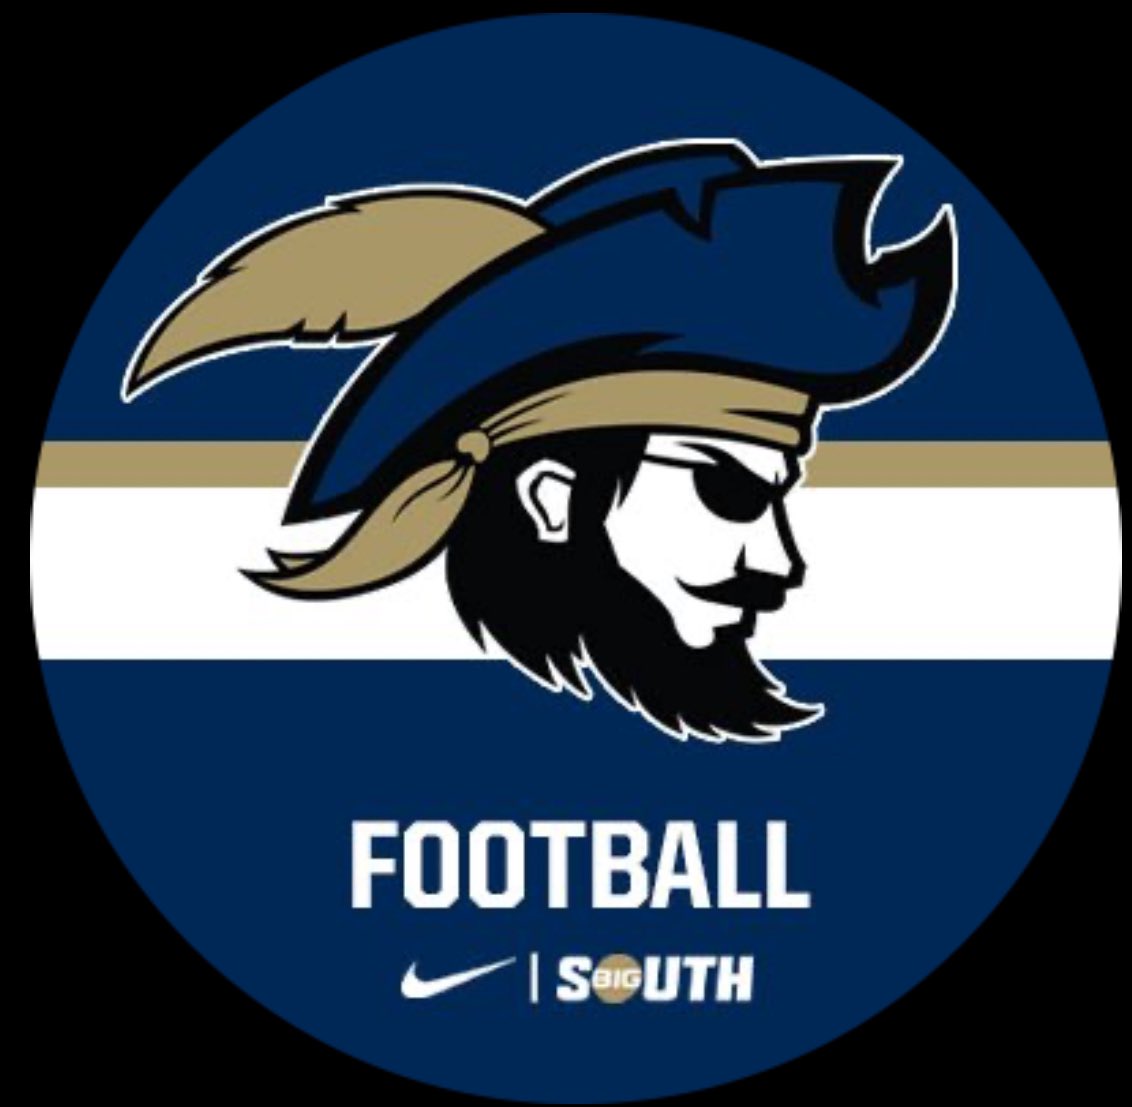 Thank you @shulerbentley and @CoachHollifield for stopping by today to talk about our athletes.